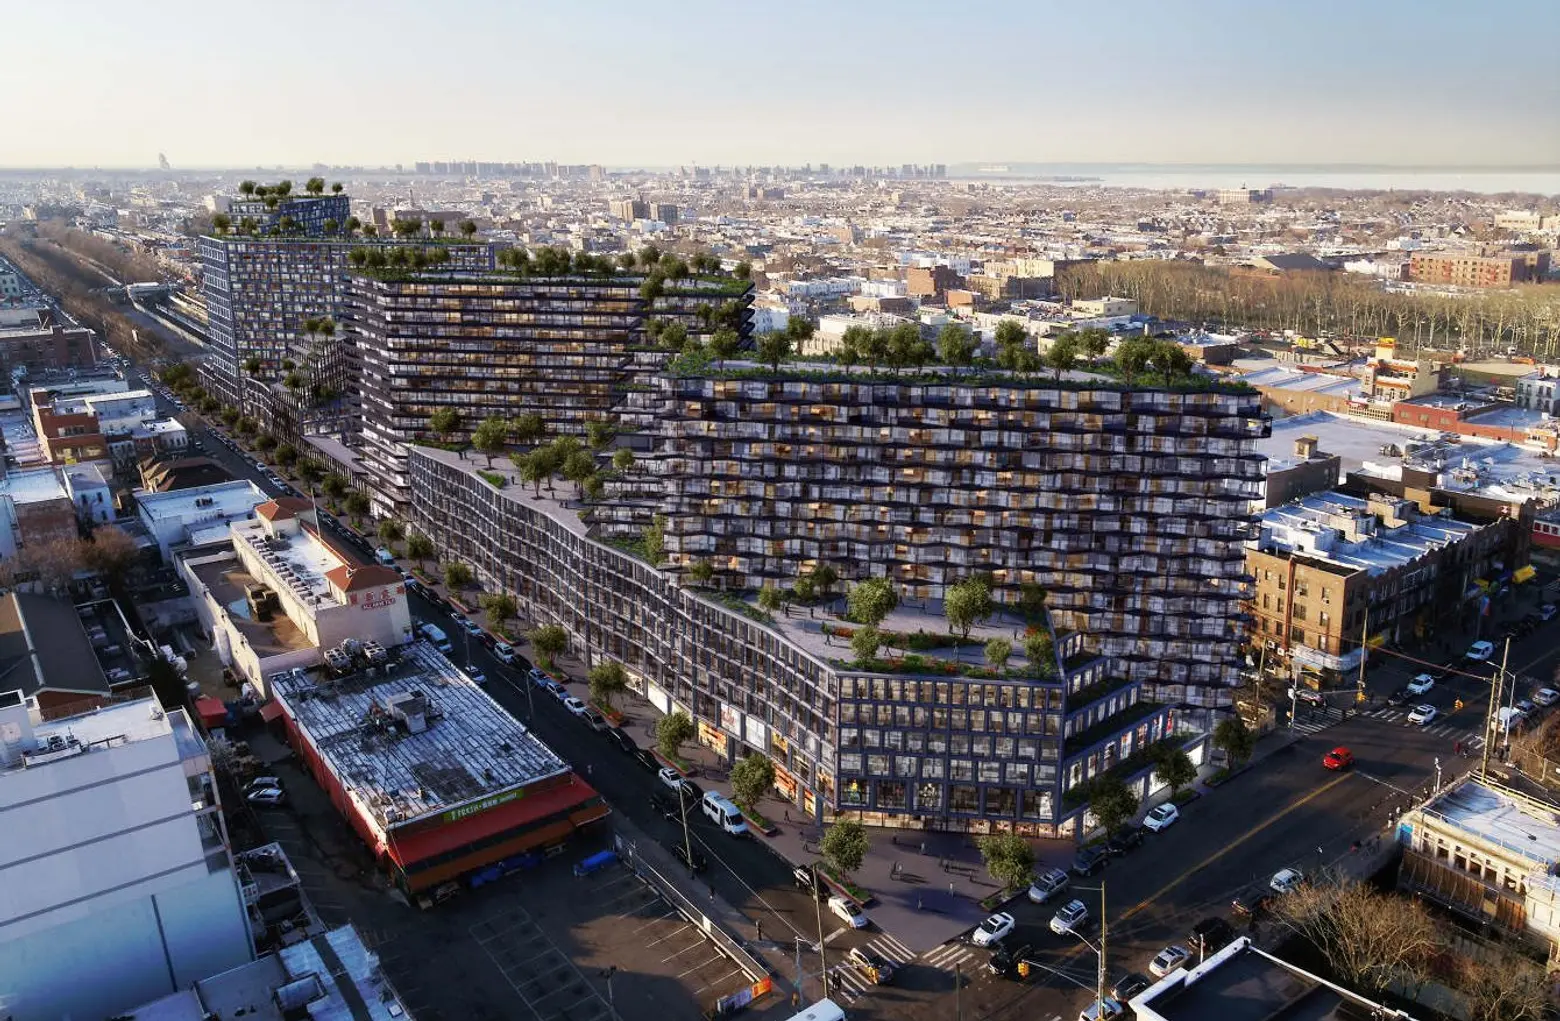 Get a first look at the next proposed mega-development for Sunset Park